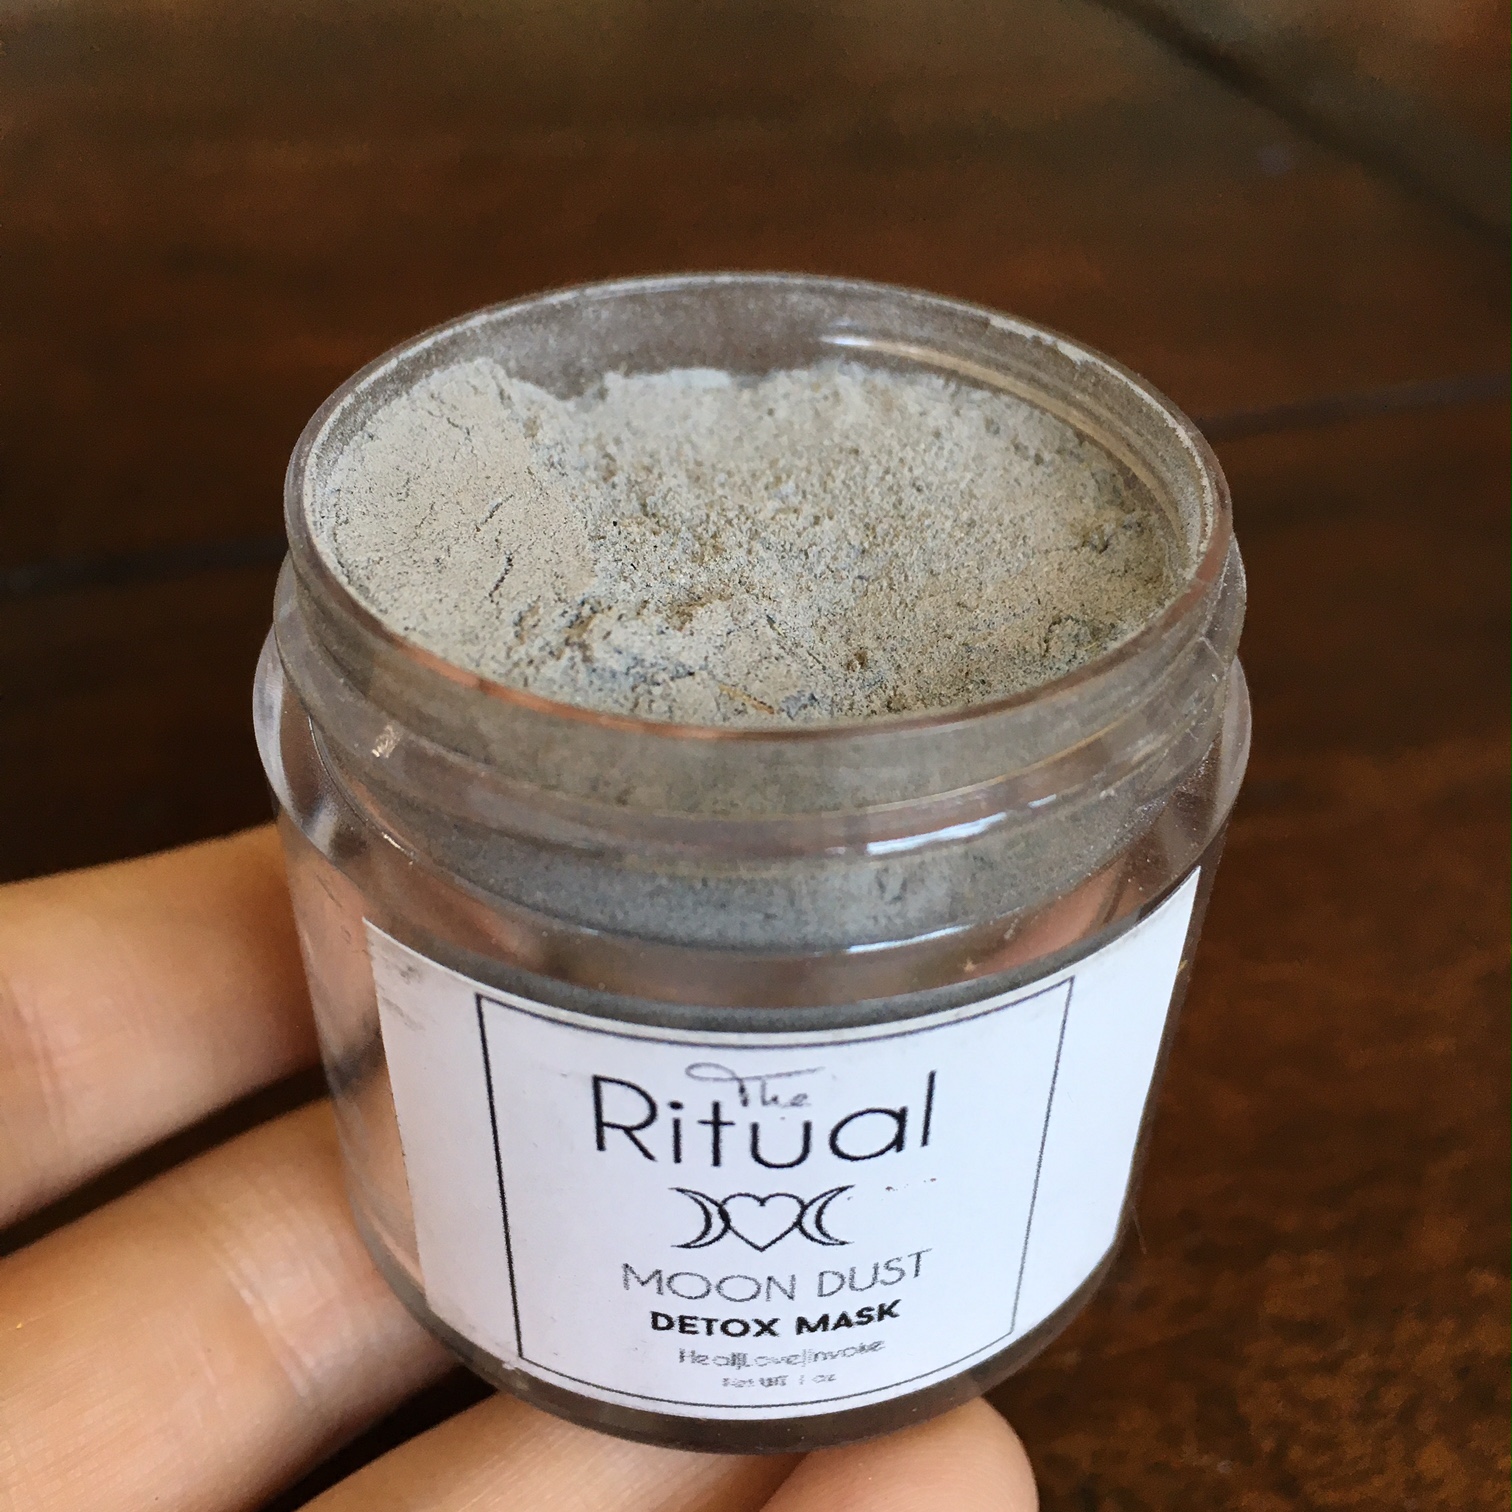 The Ritual Store clay face mask